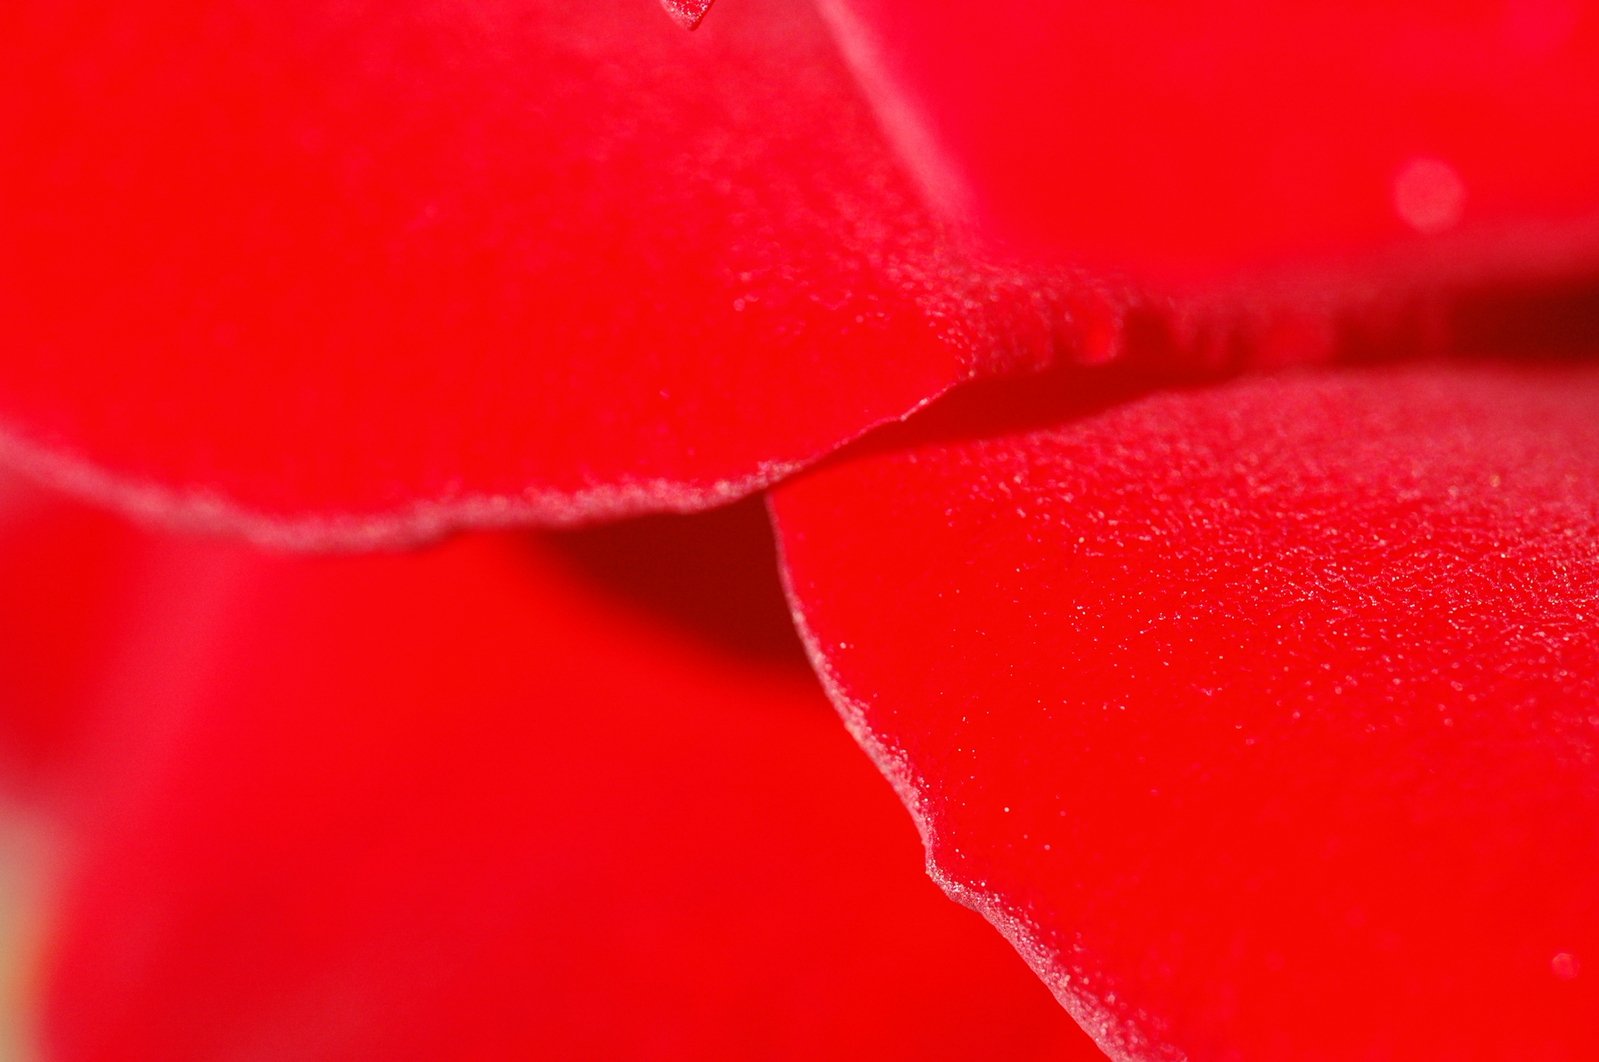 the inside of a large red flower